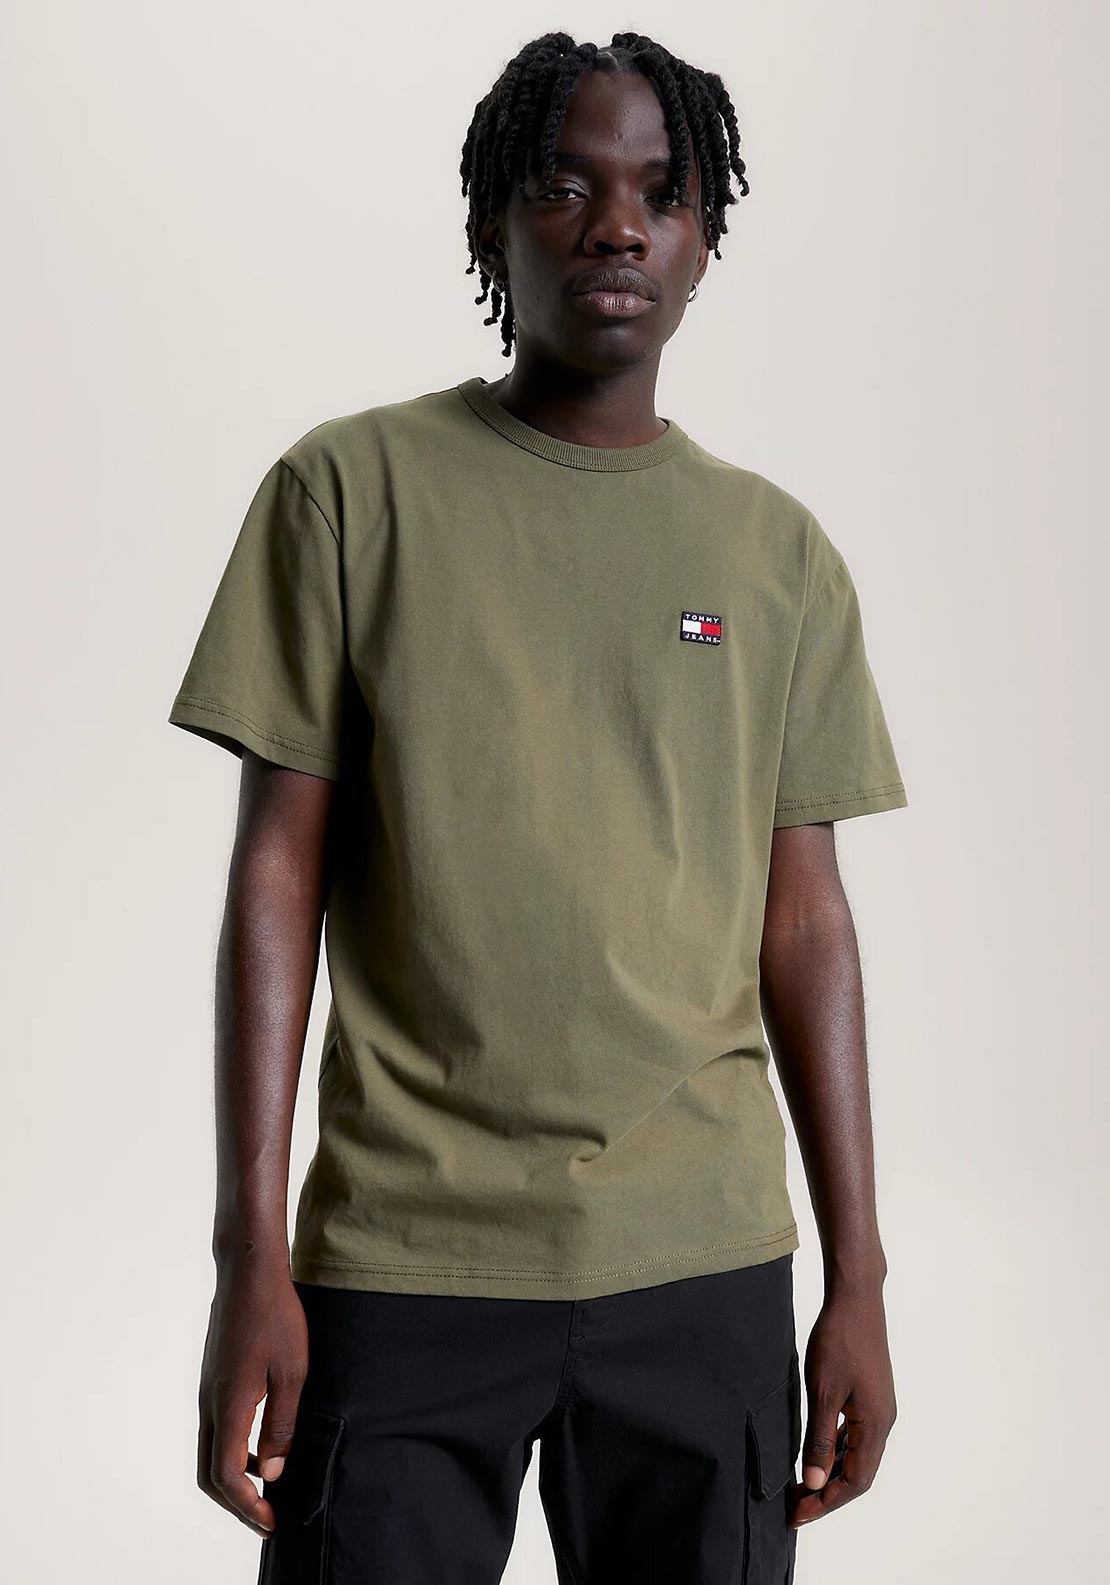 XS Olive Tommy Badge McElhinneys - Green T-Shirt, Jeans